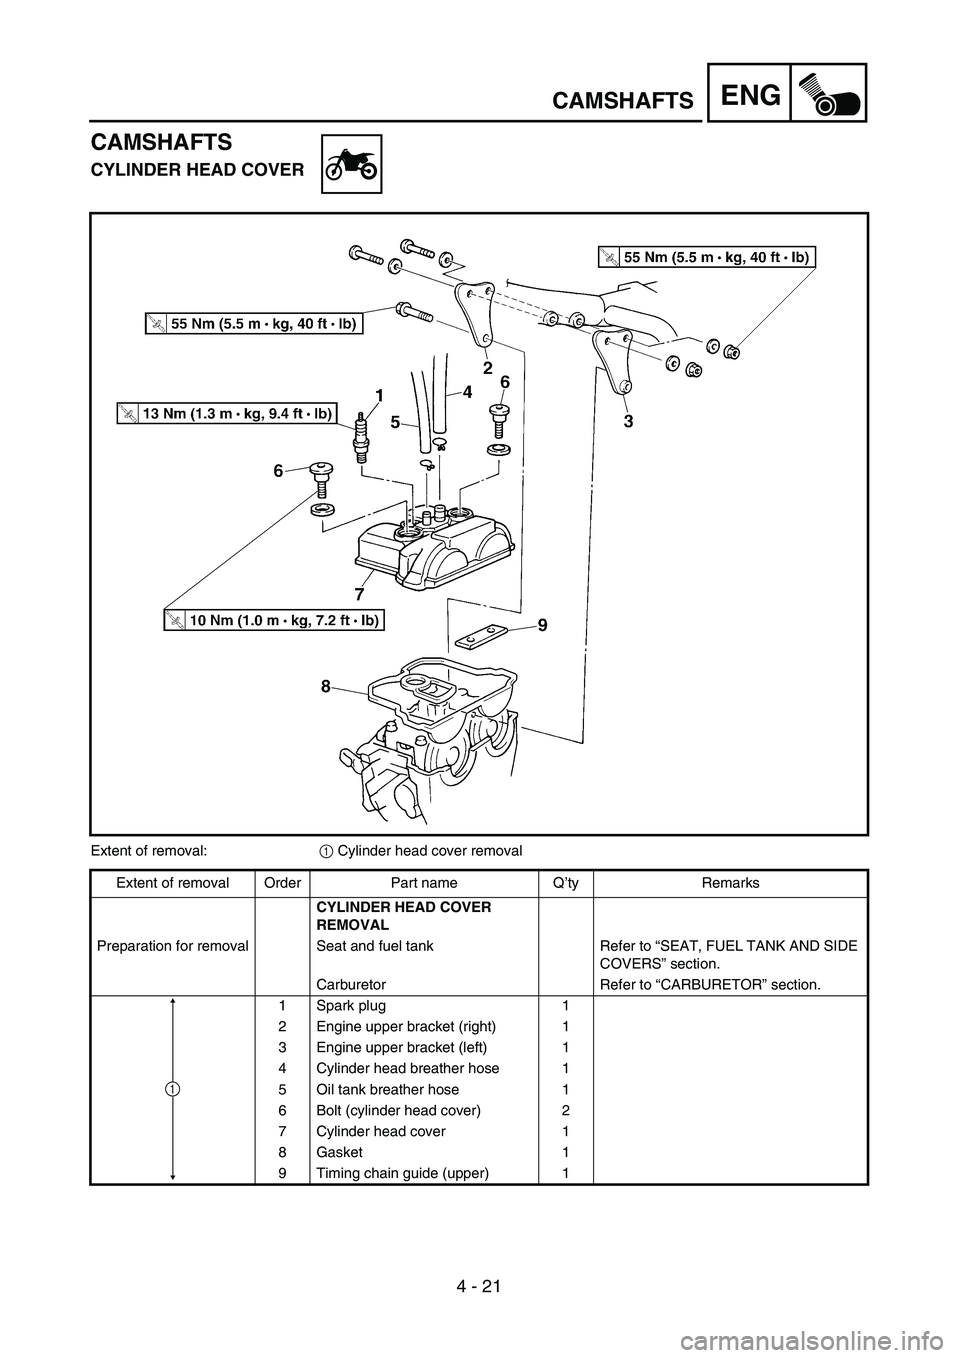 YAMAHA YZ450F 2004  Owners Manual 4 - 21
ENGCAMSHAFTS
CAMSHAFTS
CYLINDER HEAD COVER
Extent of removal:1 Cylinder head cover removal
Extent of removal Order Part name Q’ty Remarks
CYLINDER HEAD COVER 
REMOVAL
Preparation for removal 